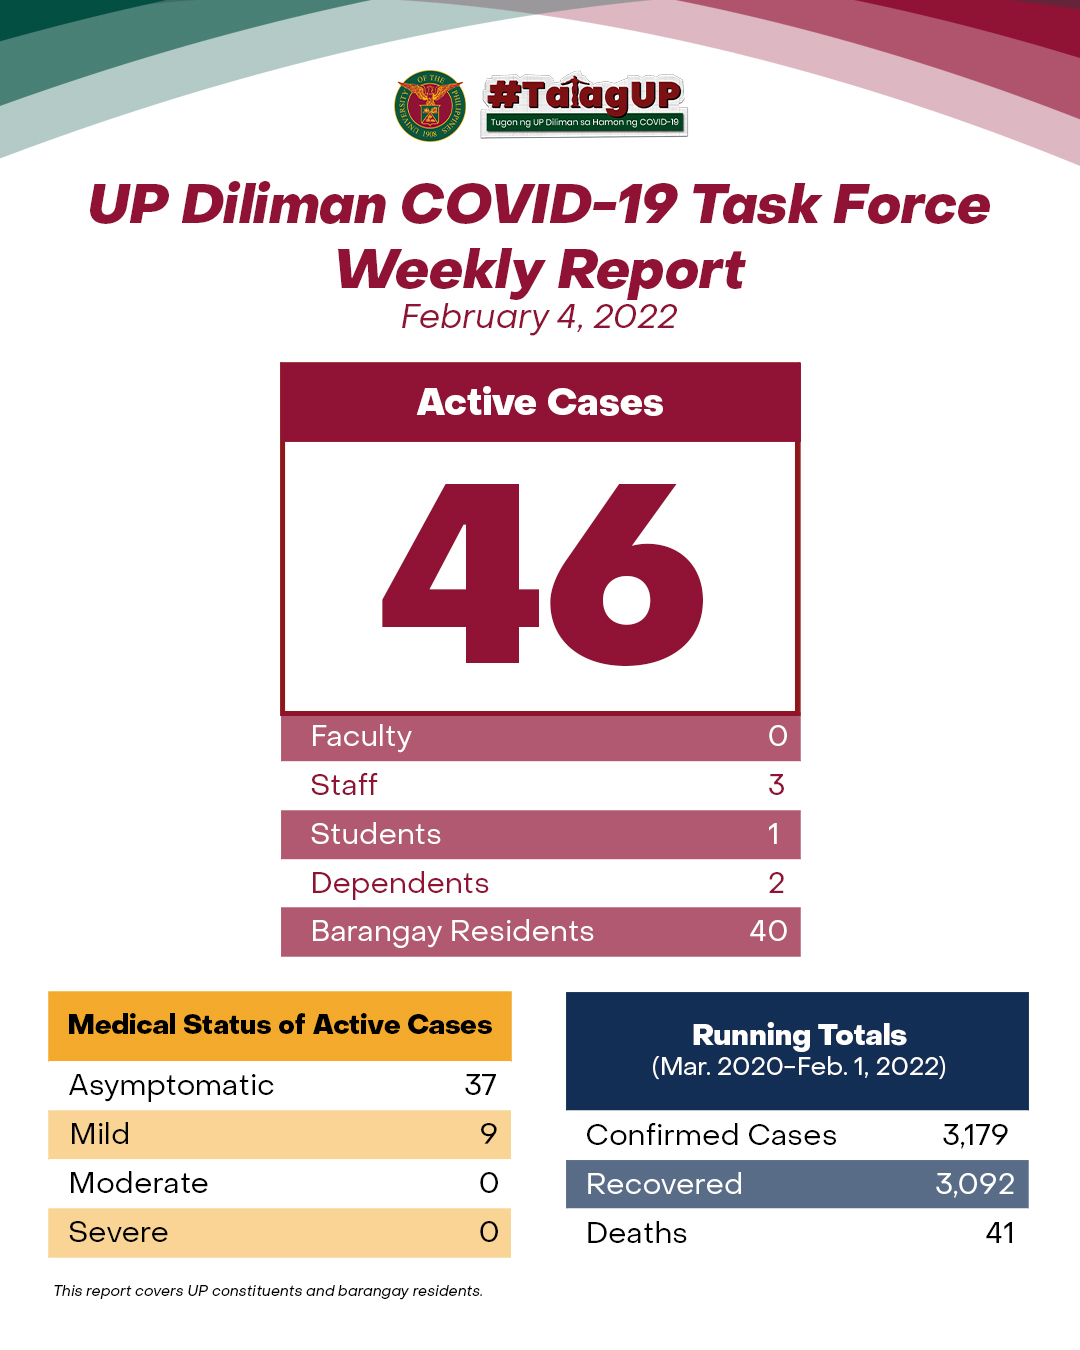 UP Diliman COVID-19 Task Force Weekly Report (February 4, 2022)